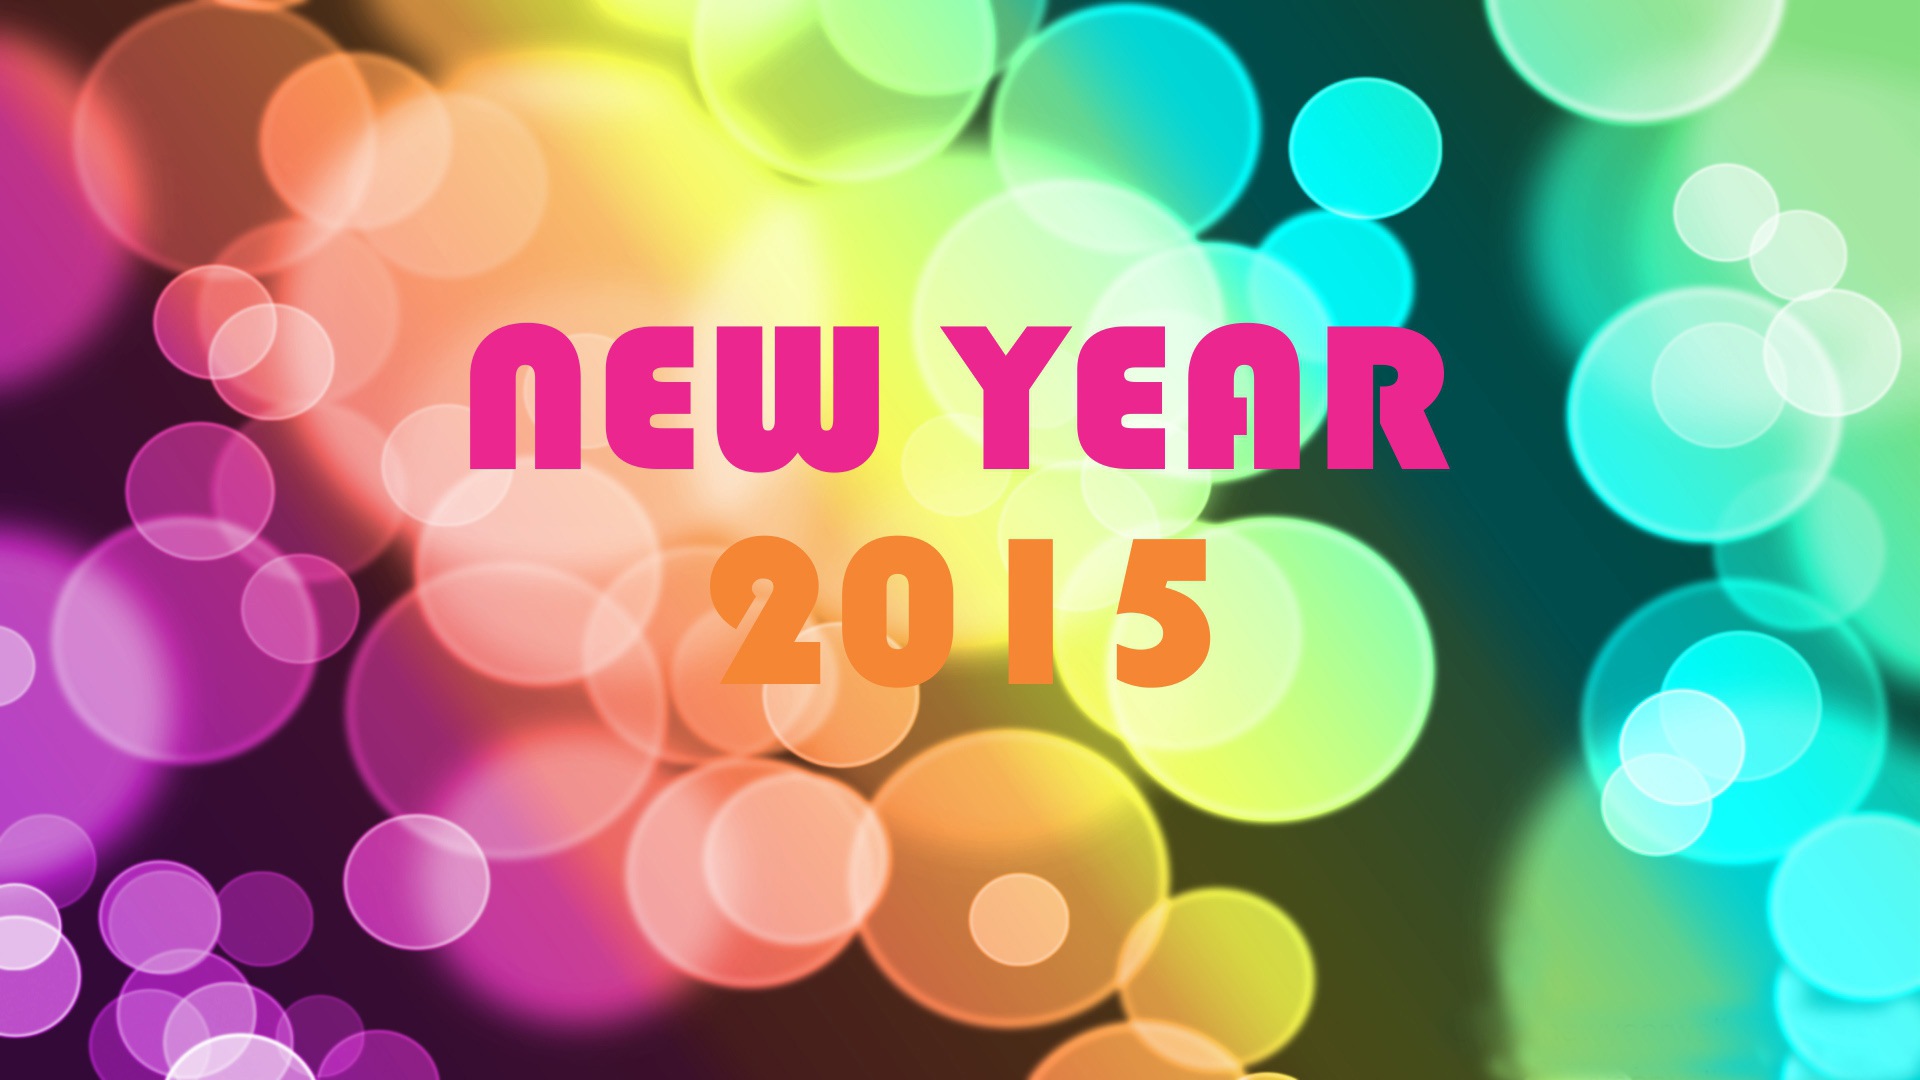 2015 New Year theme HD wallpapers (2) #18 - 1920x1080